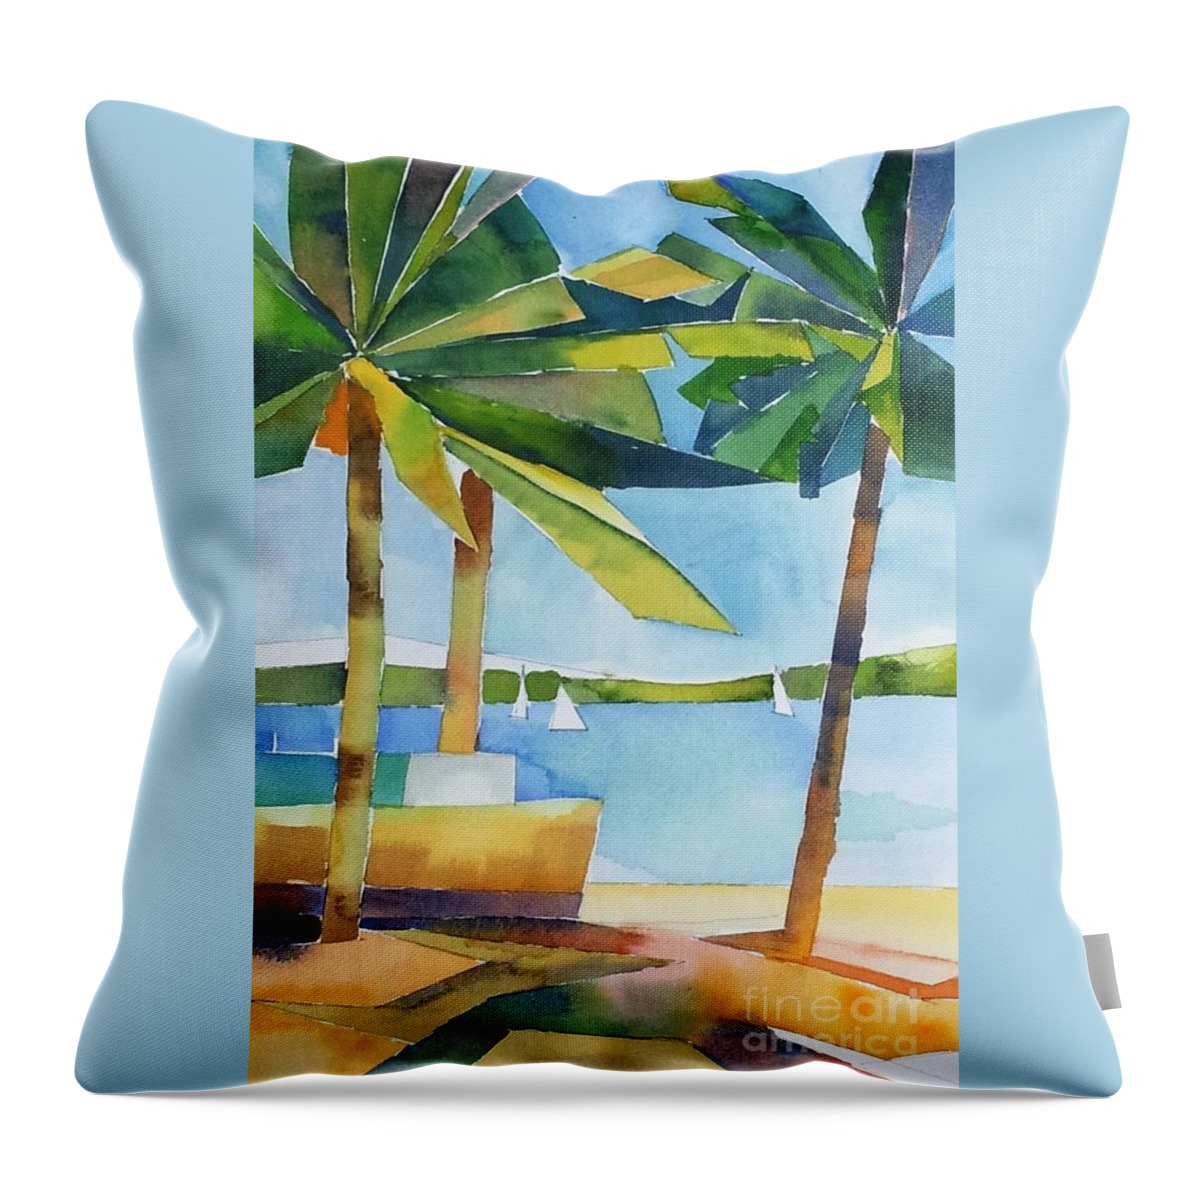 Landscape Throw Pillow featuring the painting Island Palms by Yolanda Koh